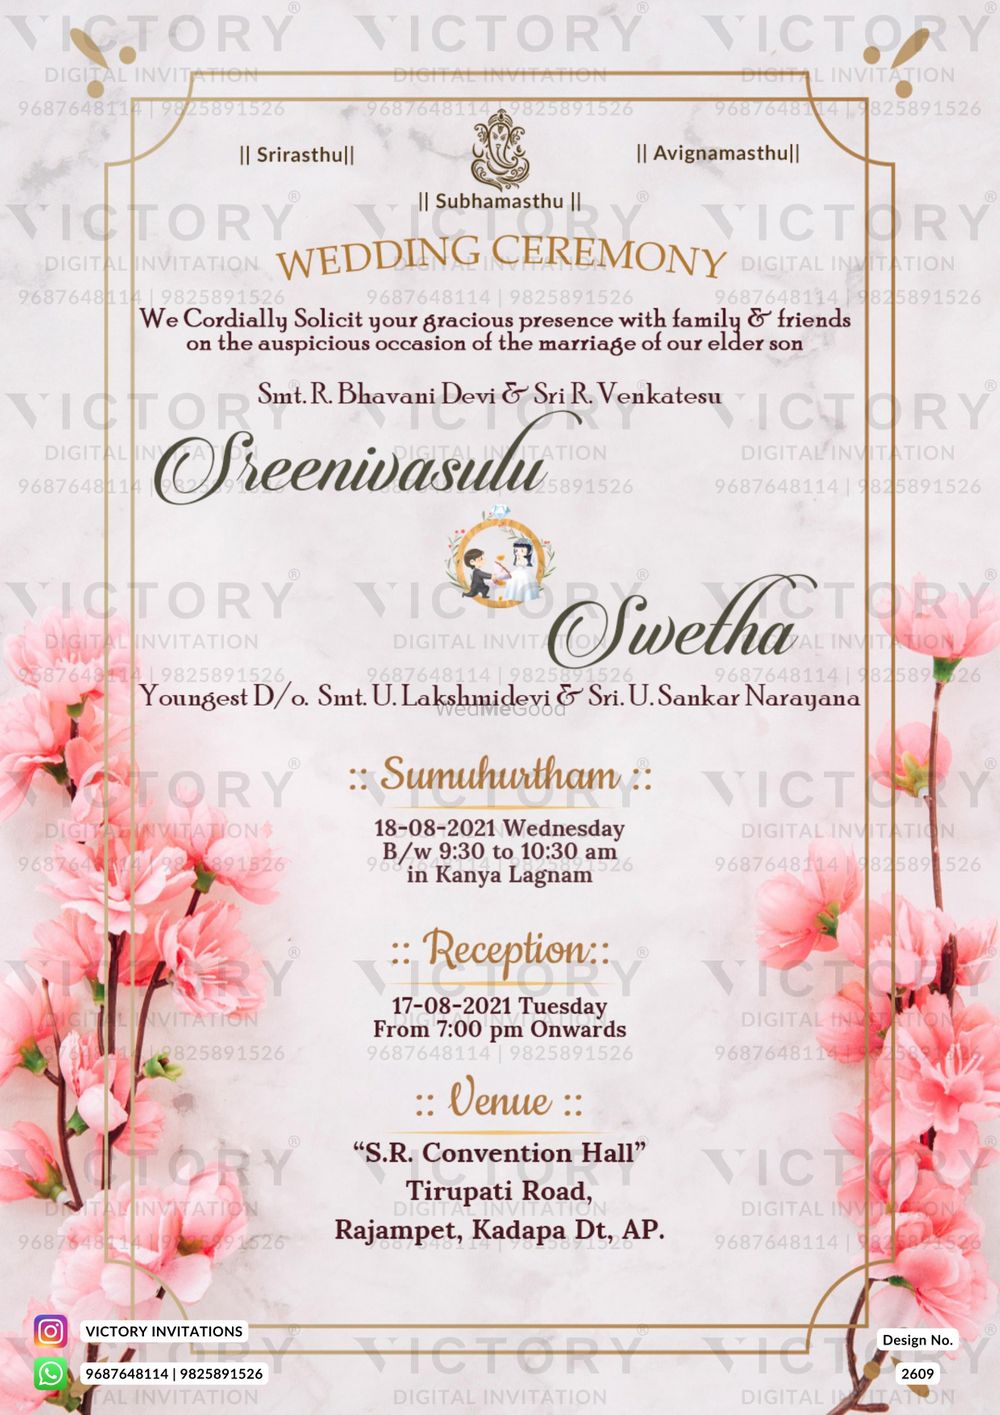 Photo From Wedding - By Victory Invitations